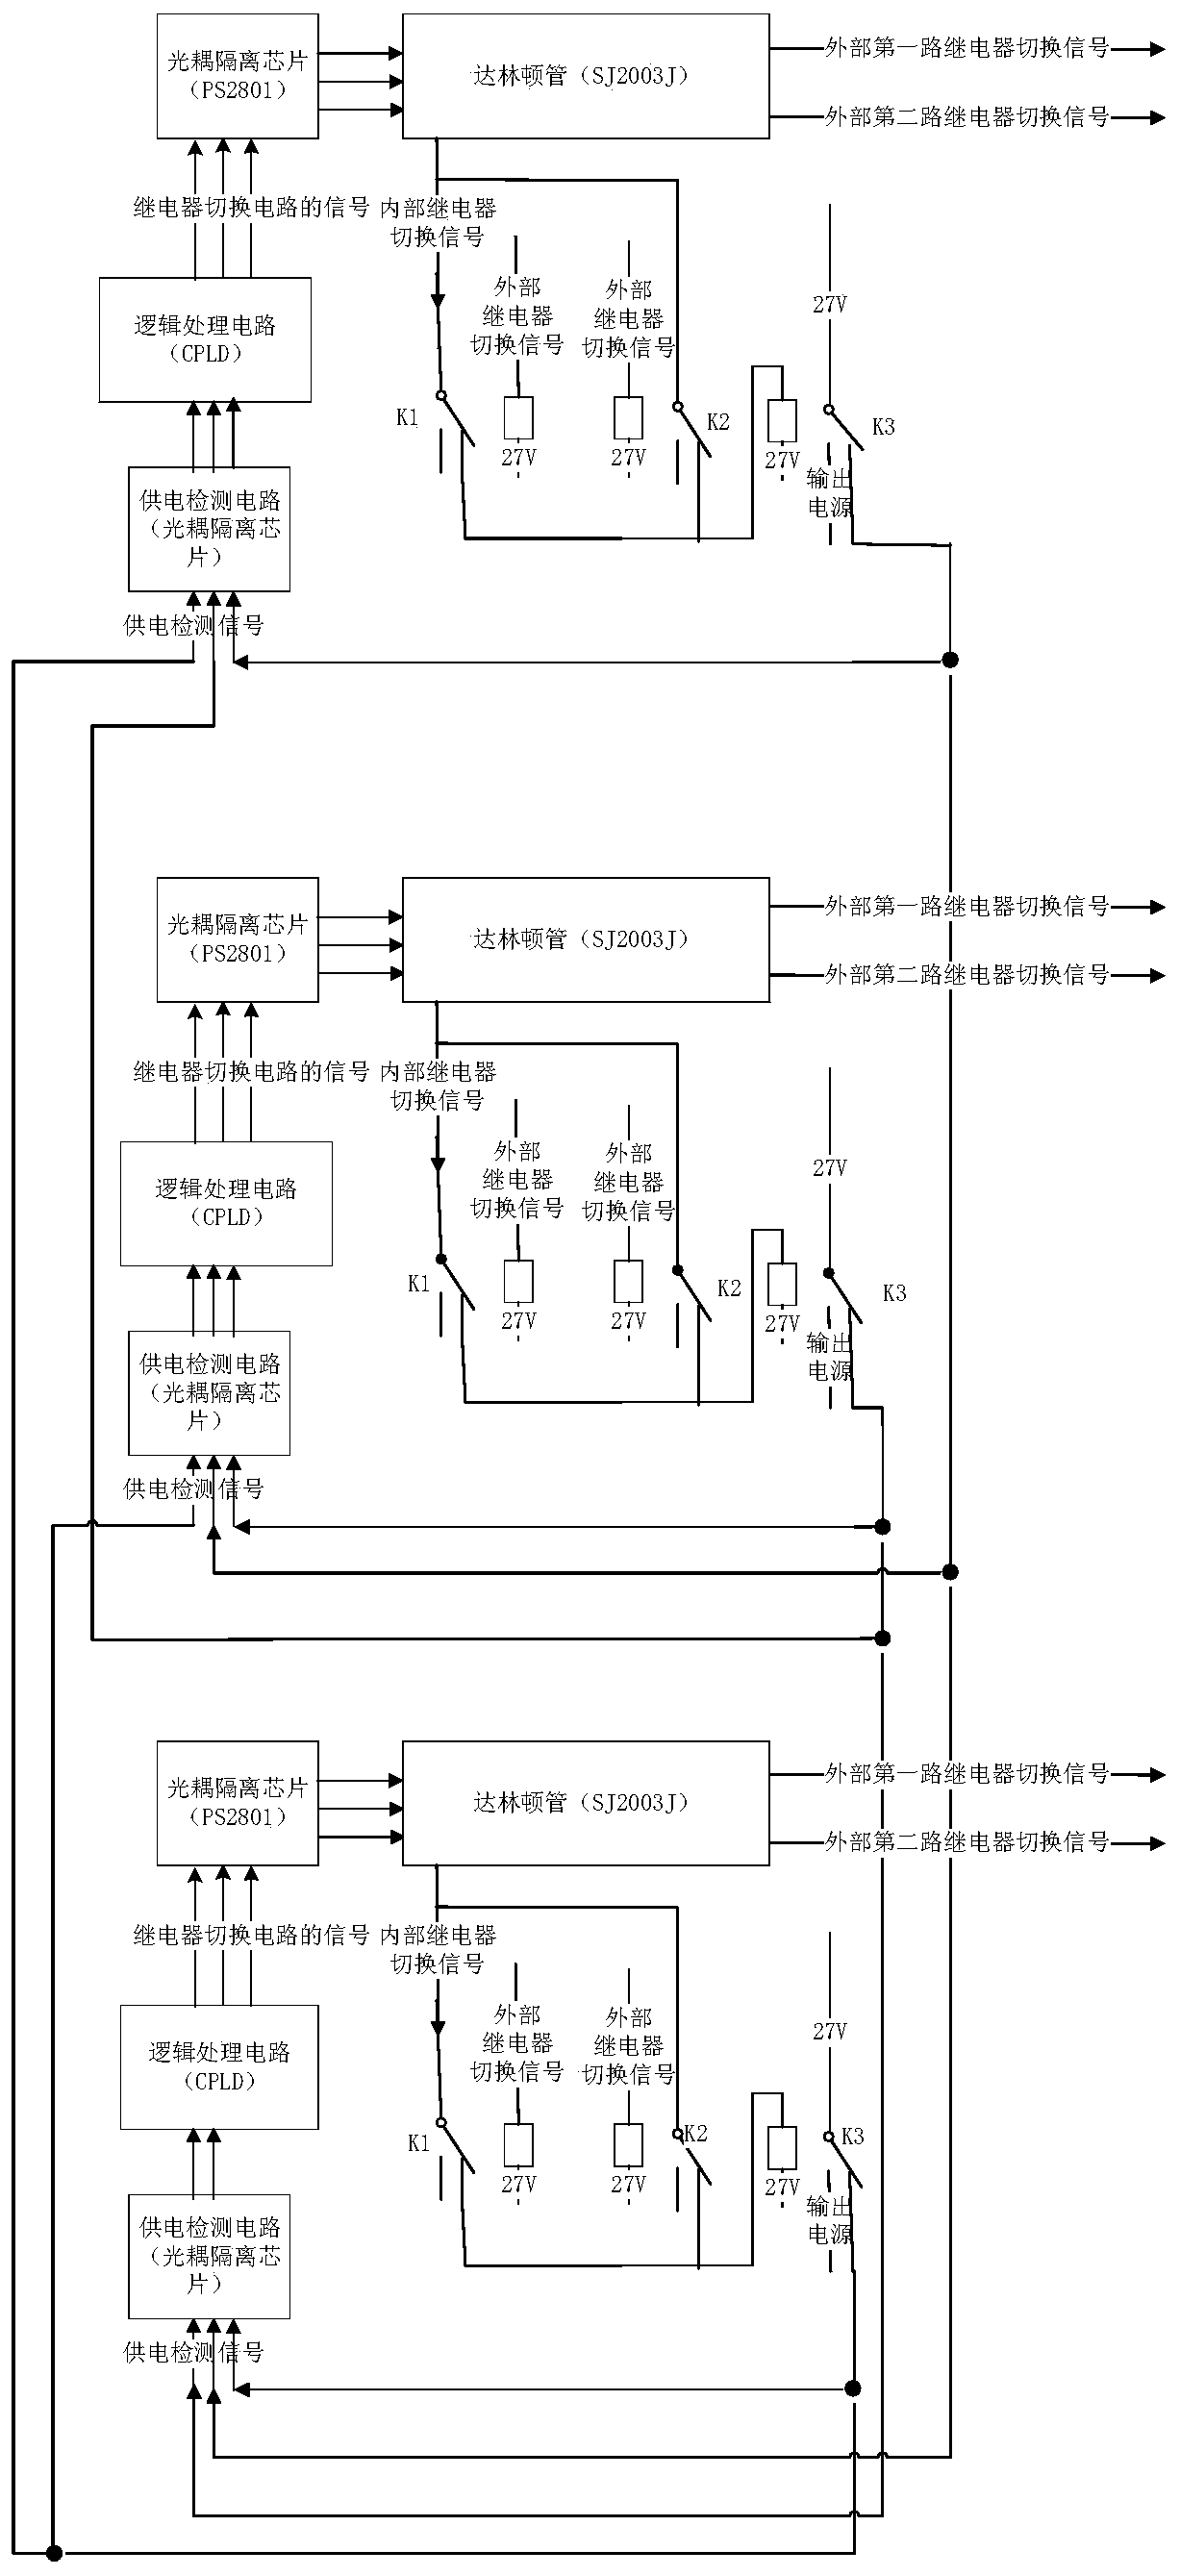 Tri-redundancy switching circuit applicable to aviation electrothermal control system